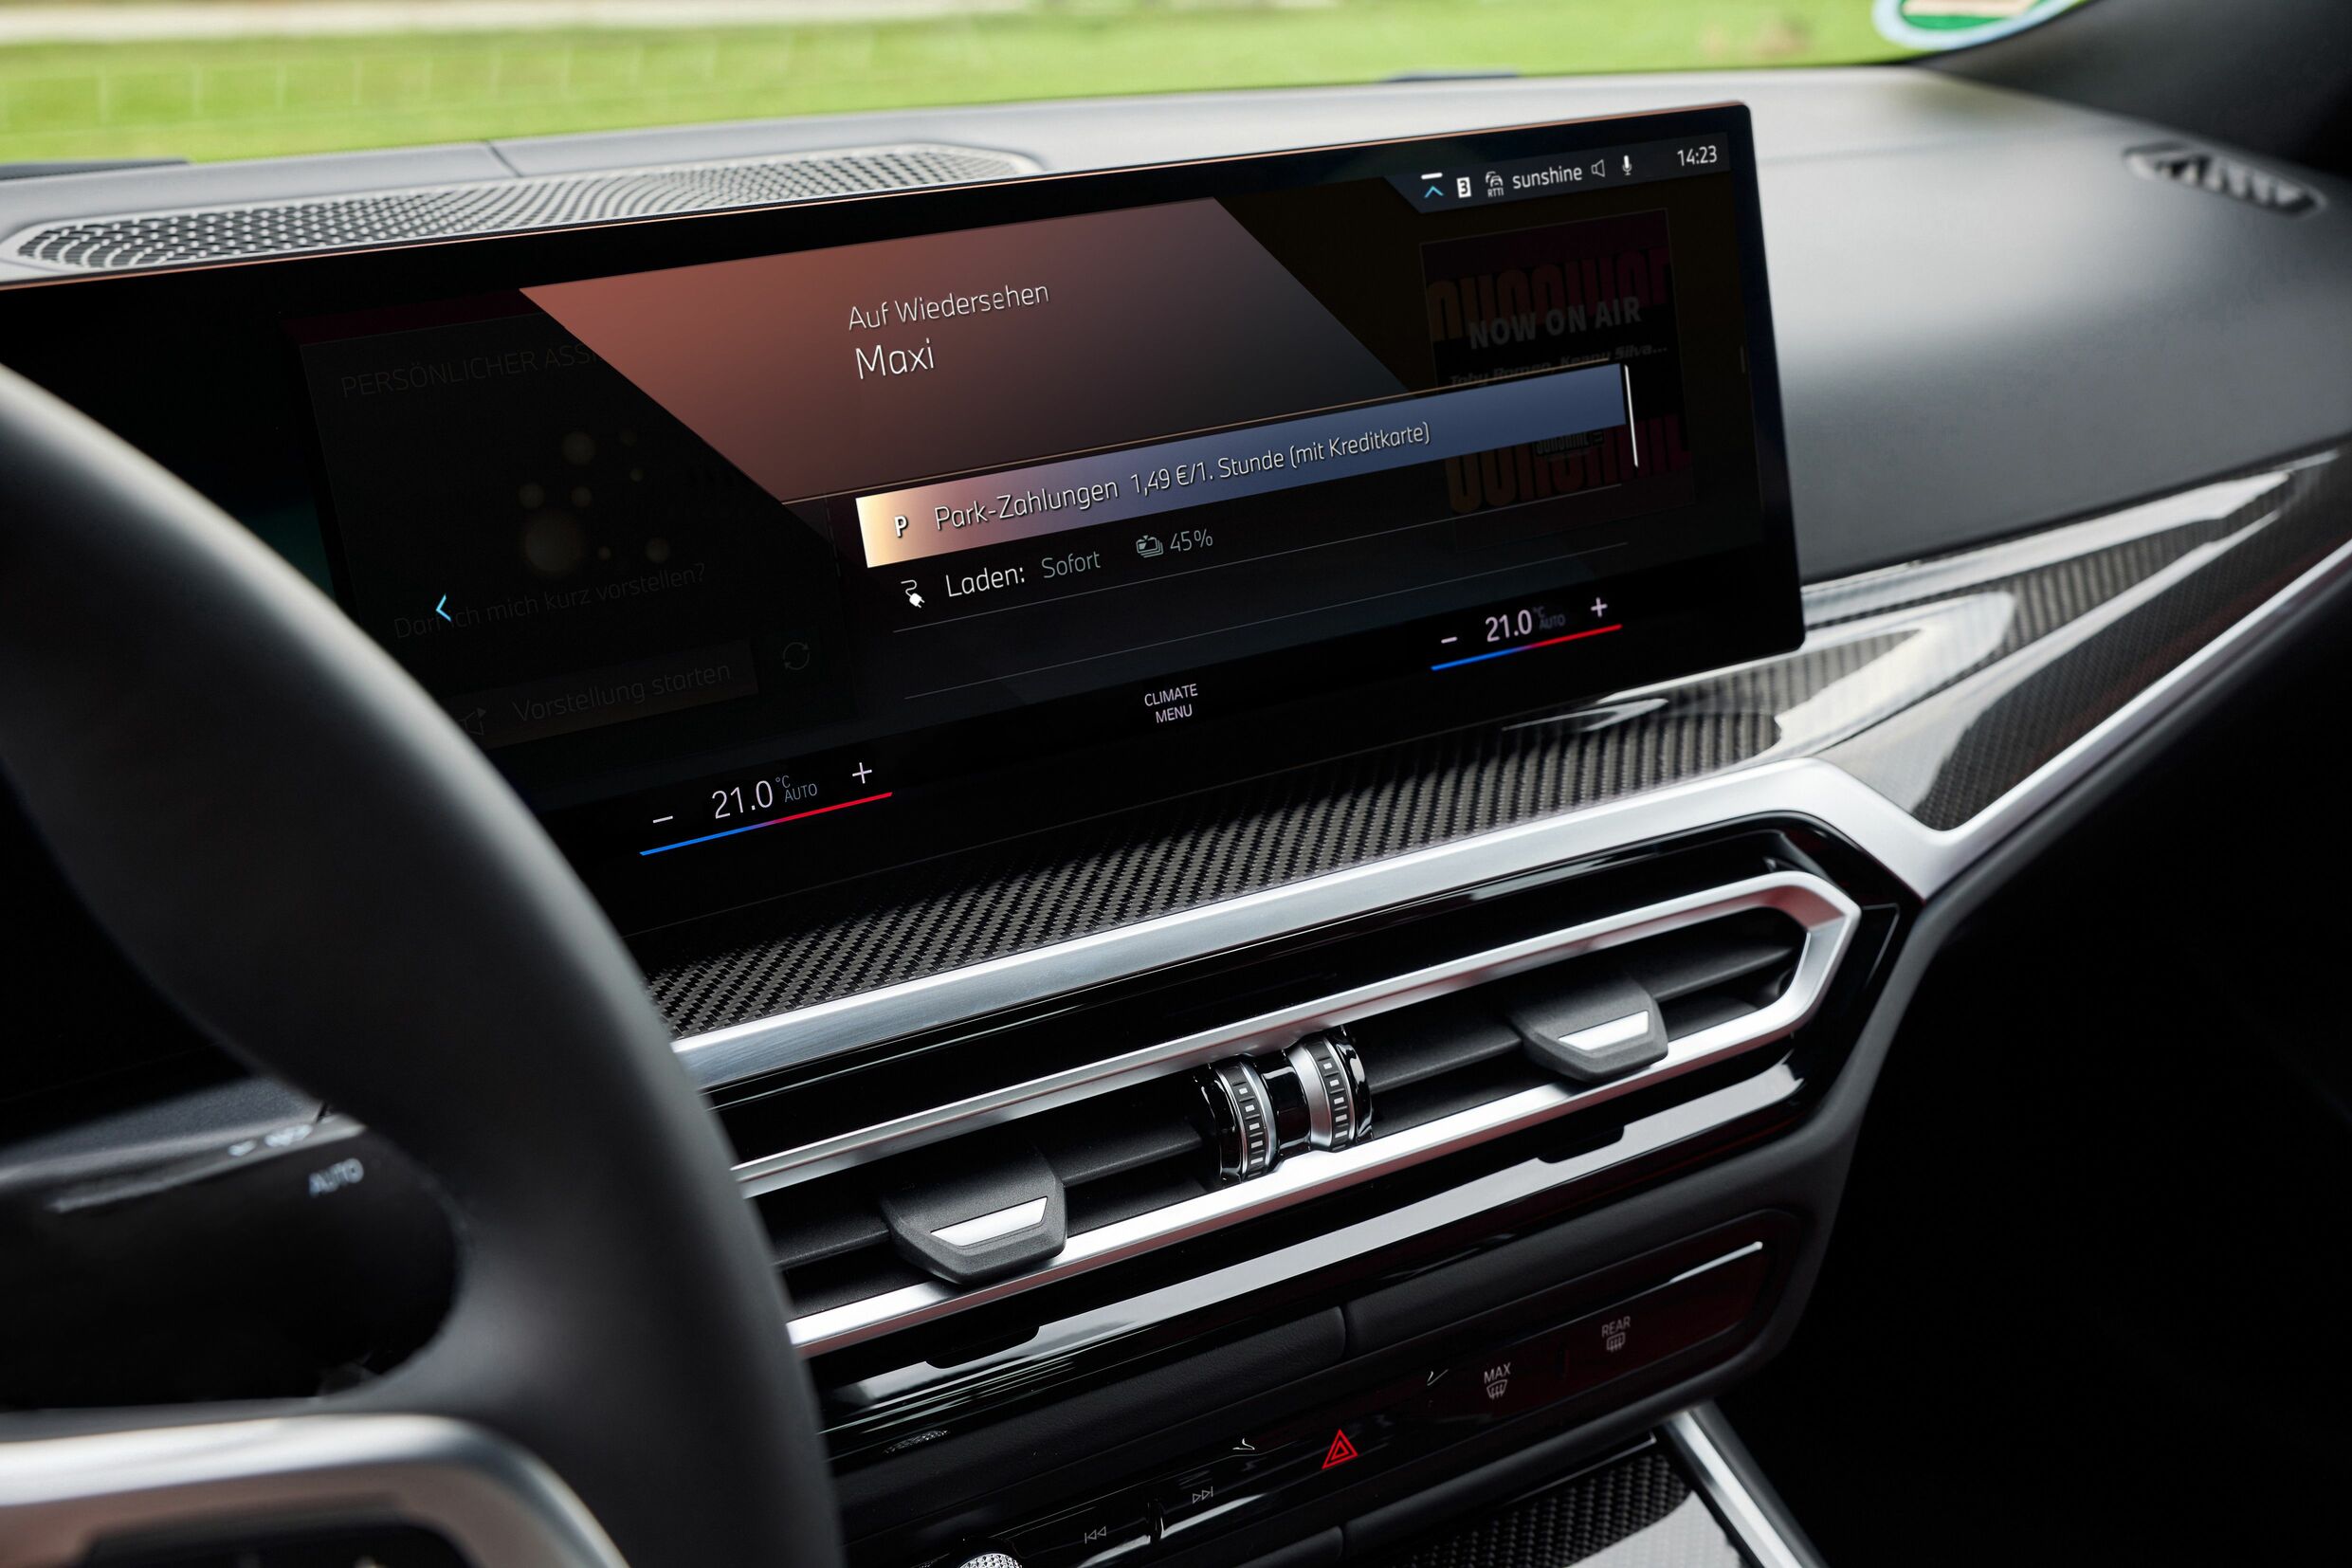 A Single Sign-On (SSO) feature enables seamless payments via the vehicle’s infotainment system.